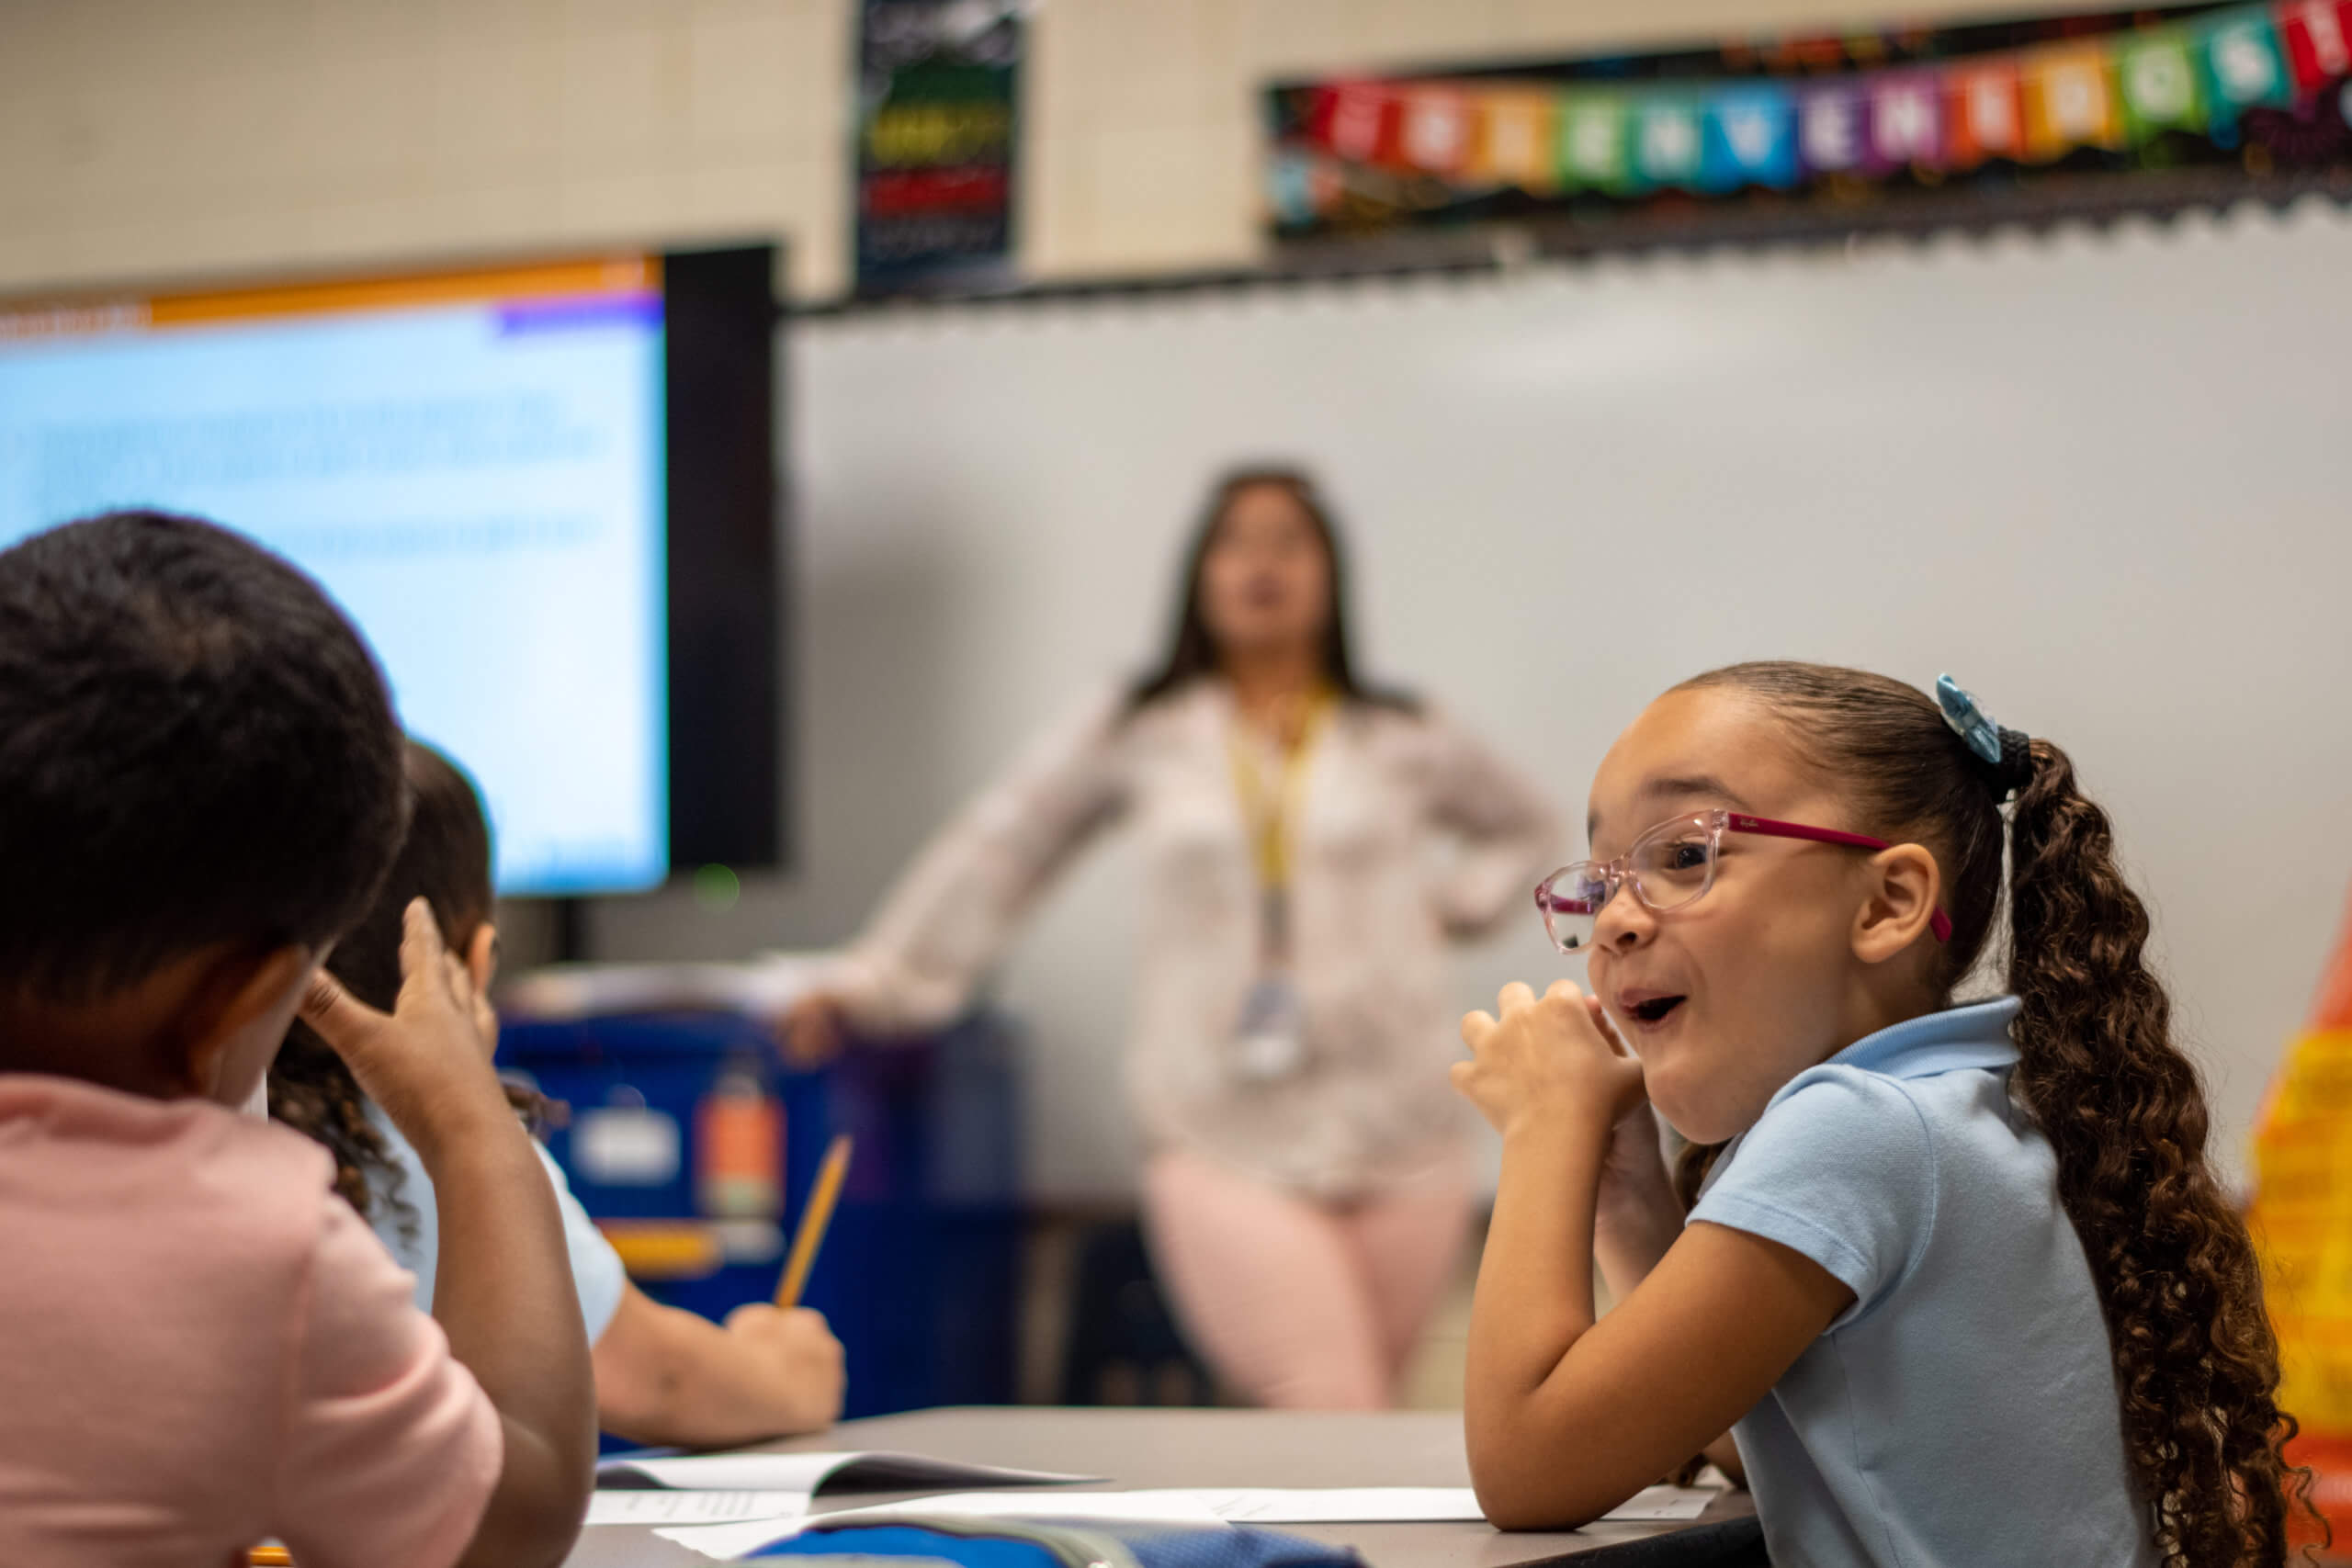 A young girl making an excited face towards something off screen with a teacher in the background